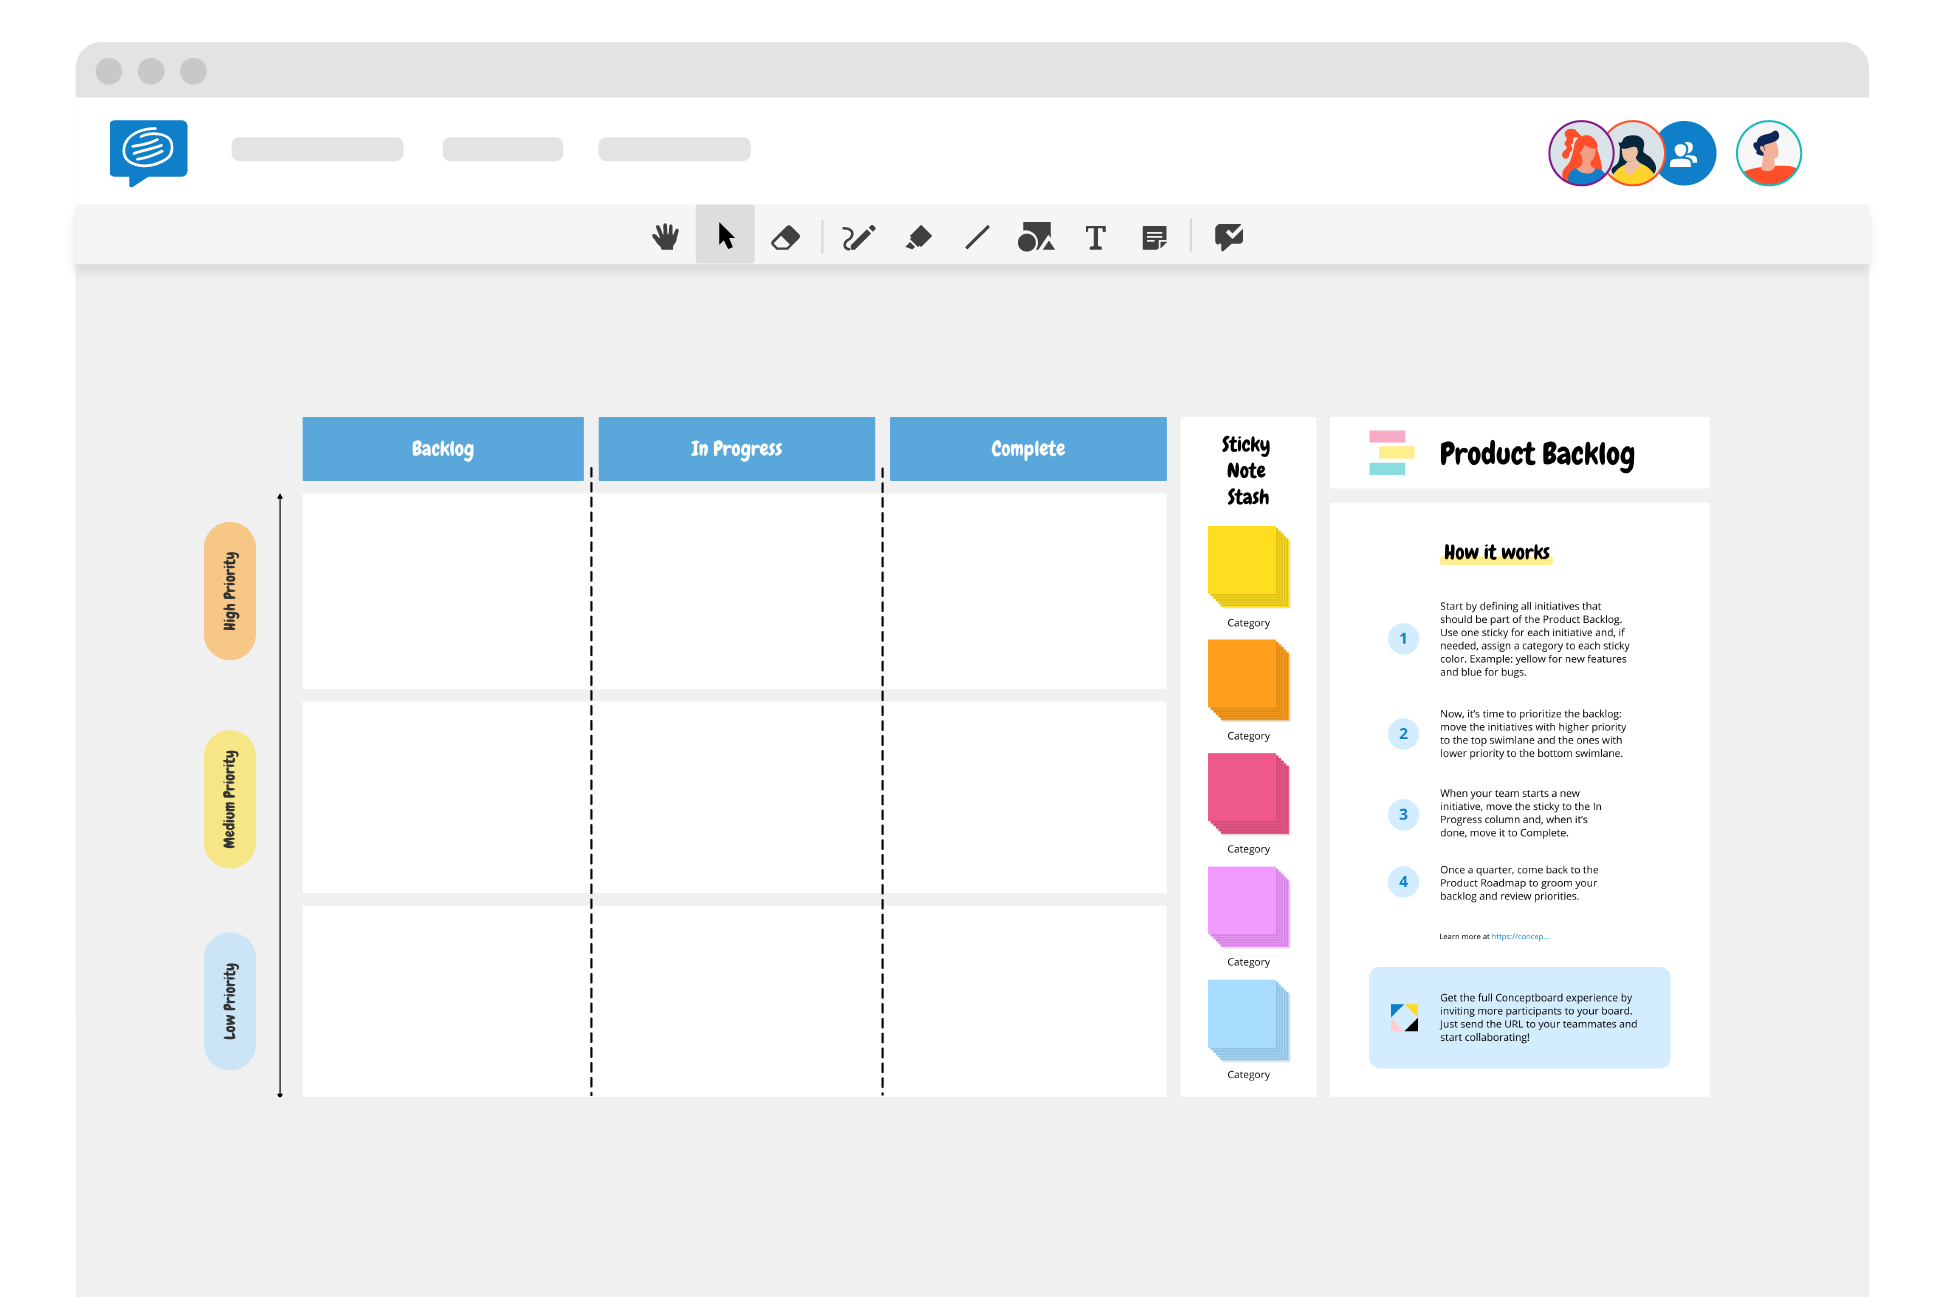 Product Backlog Template